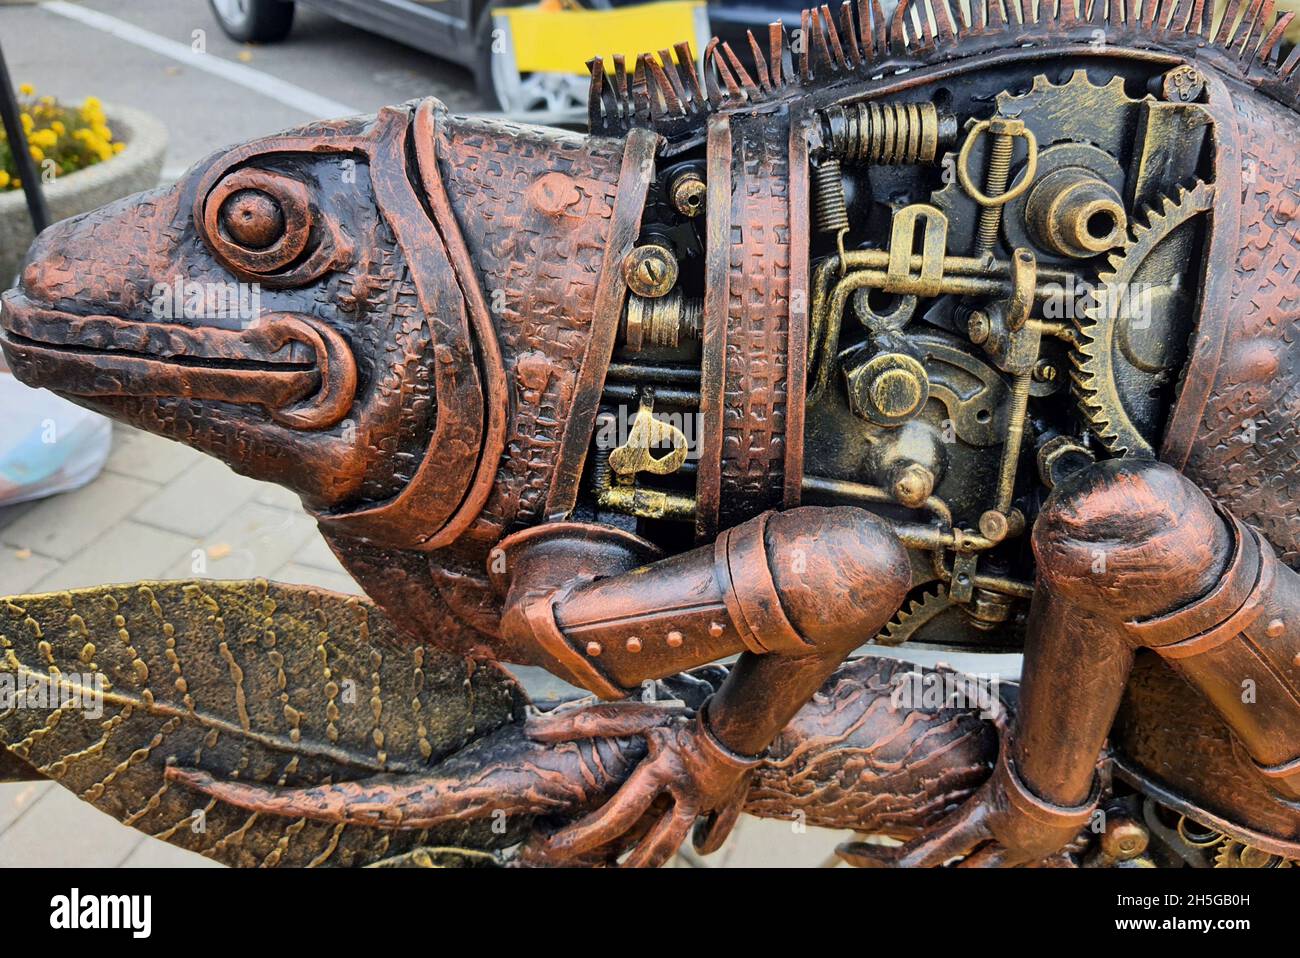 A forged metal figurine, funny unusual iron iguana are presented at Koval  fest exhibition. Art object sculpture decorative metal statue Stock Photo -  Alamy